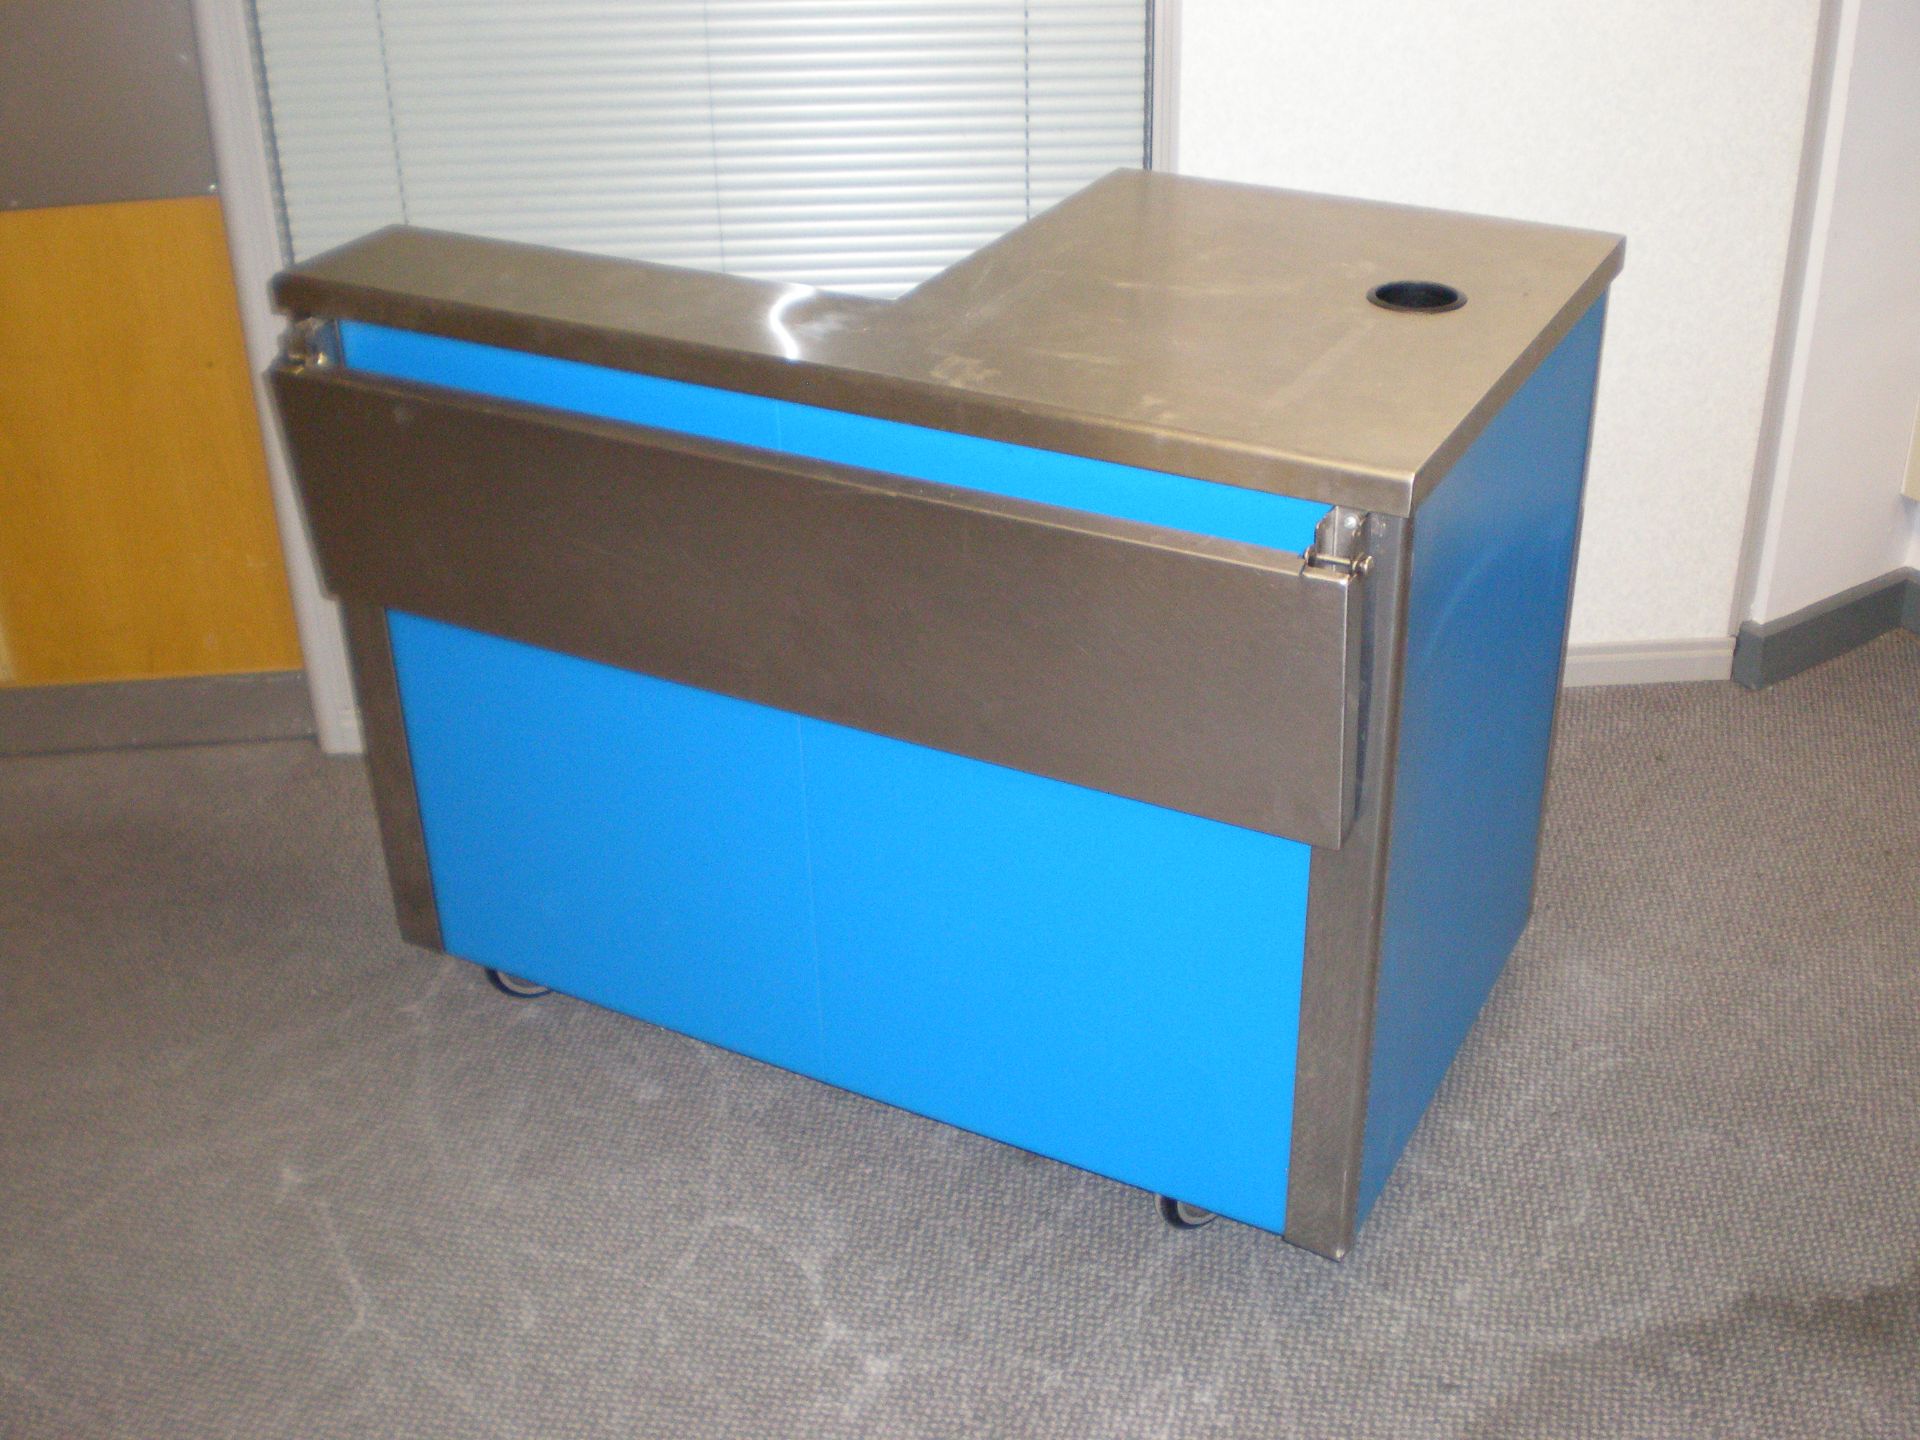 Canteen Stainless Steel Trolly Pay Station For Till, On Wheels, Collapsable Shelf For Trays, 2 - Image 2 of 4